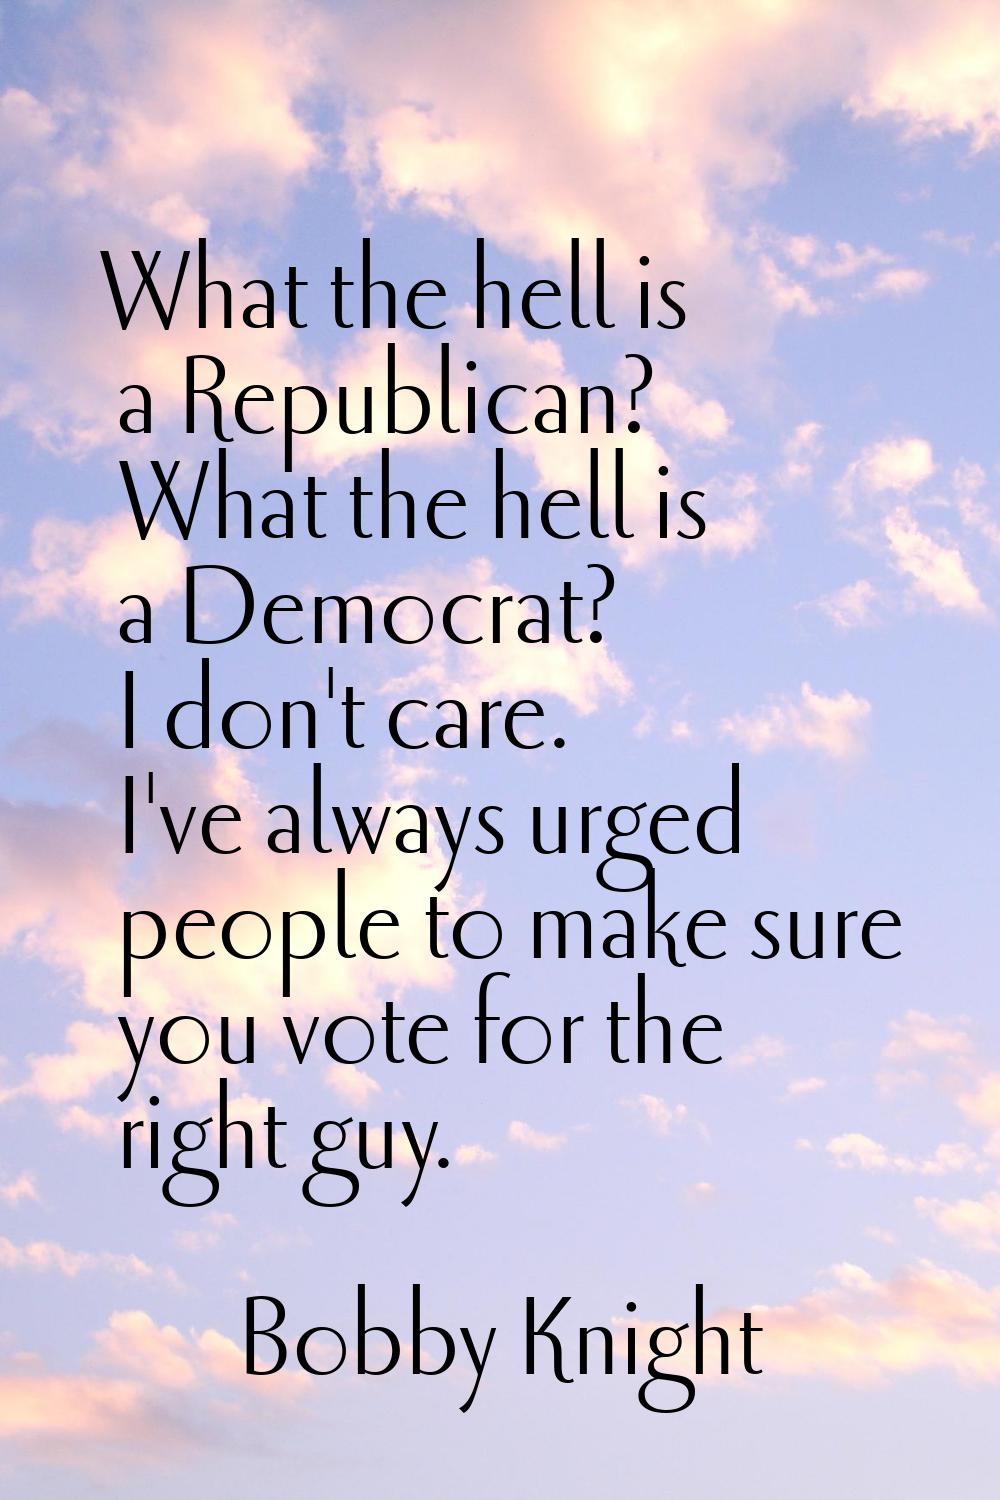 What the hell is a Republican? What the hell is a Democrat? I don't care. I've always urged people 